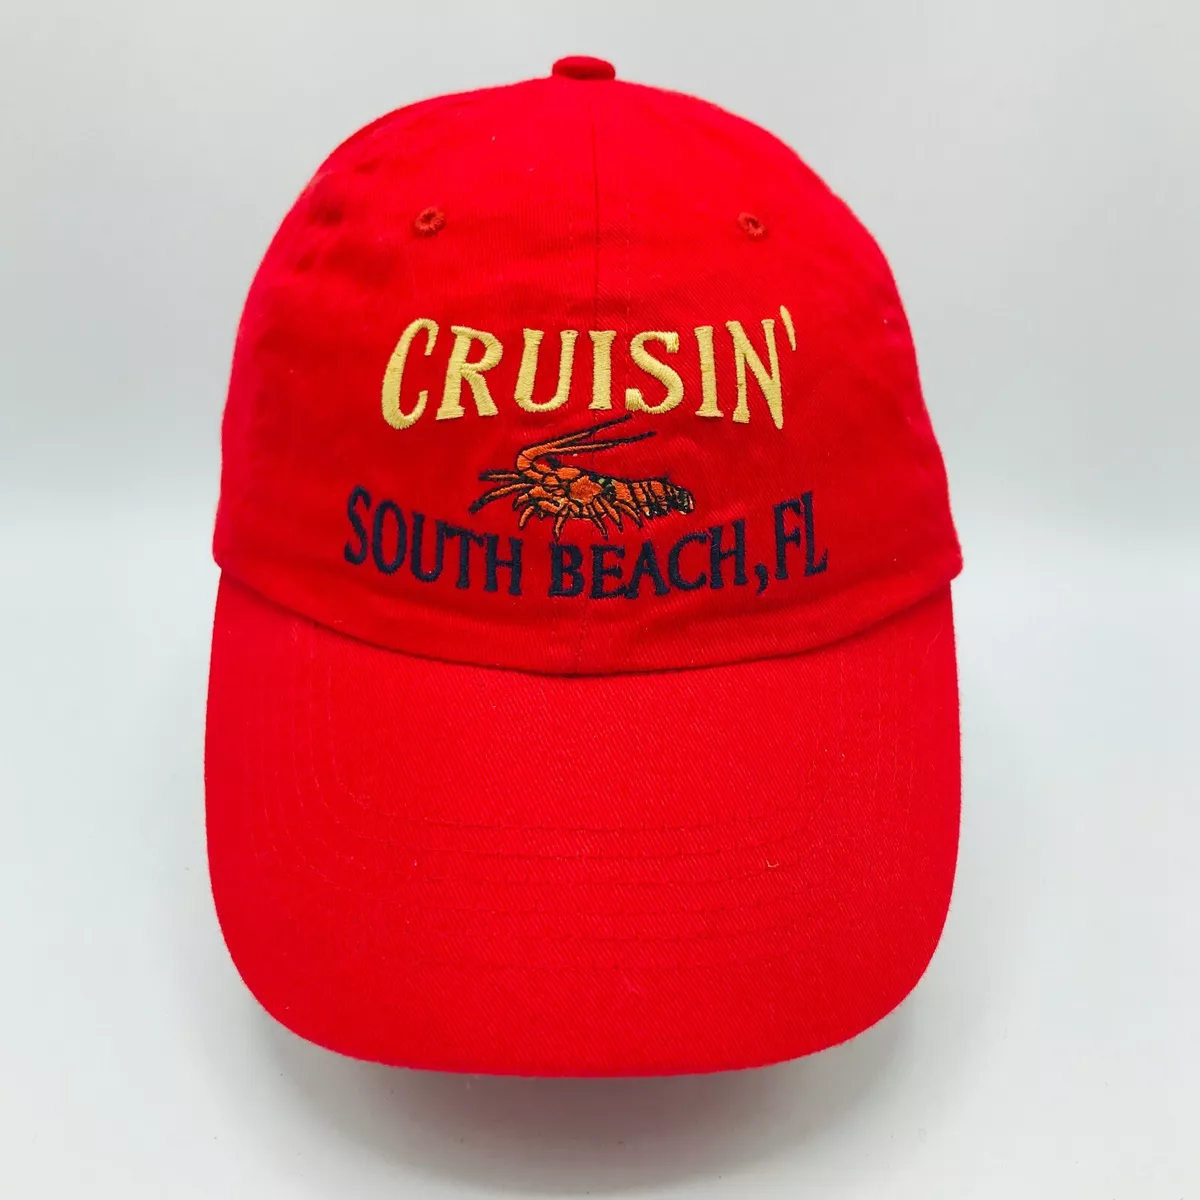 amy grade recommends south beach cruisin 3 pic